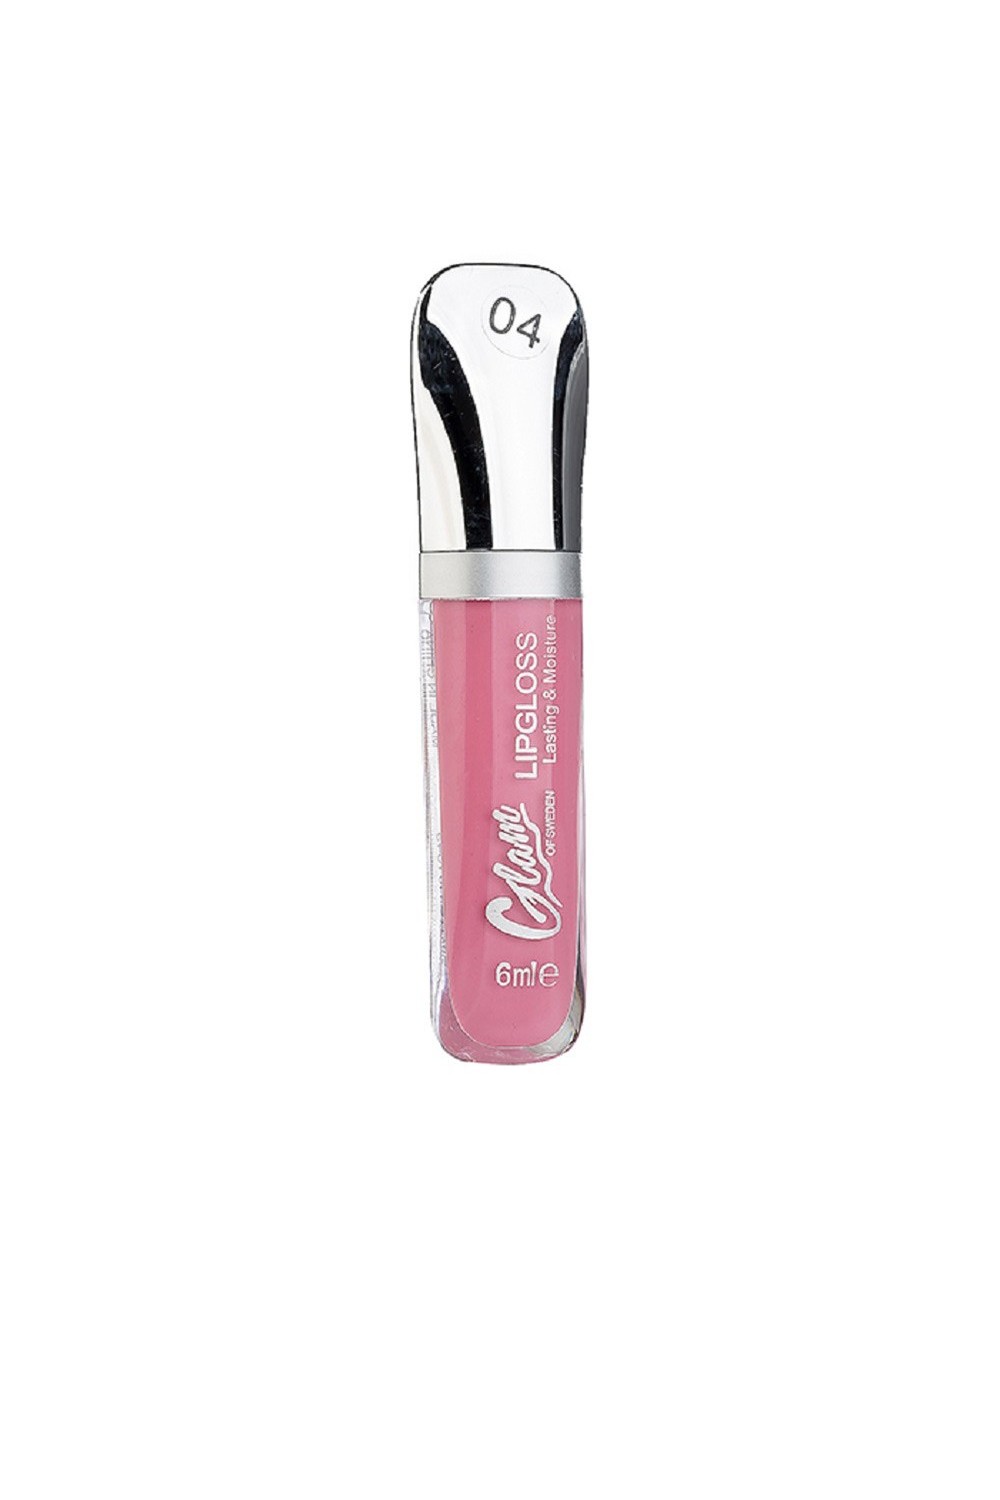 Glam Of Sweden Glossy Shine Lipgloss 04-Pink Power 6ml